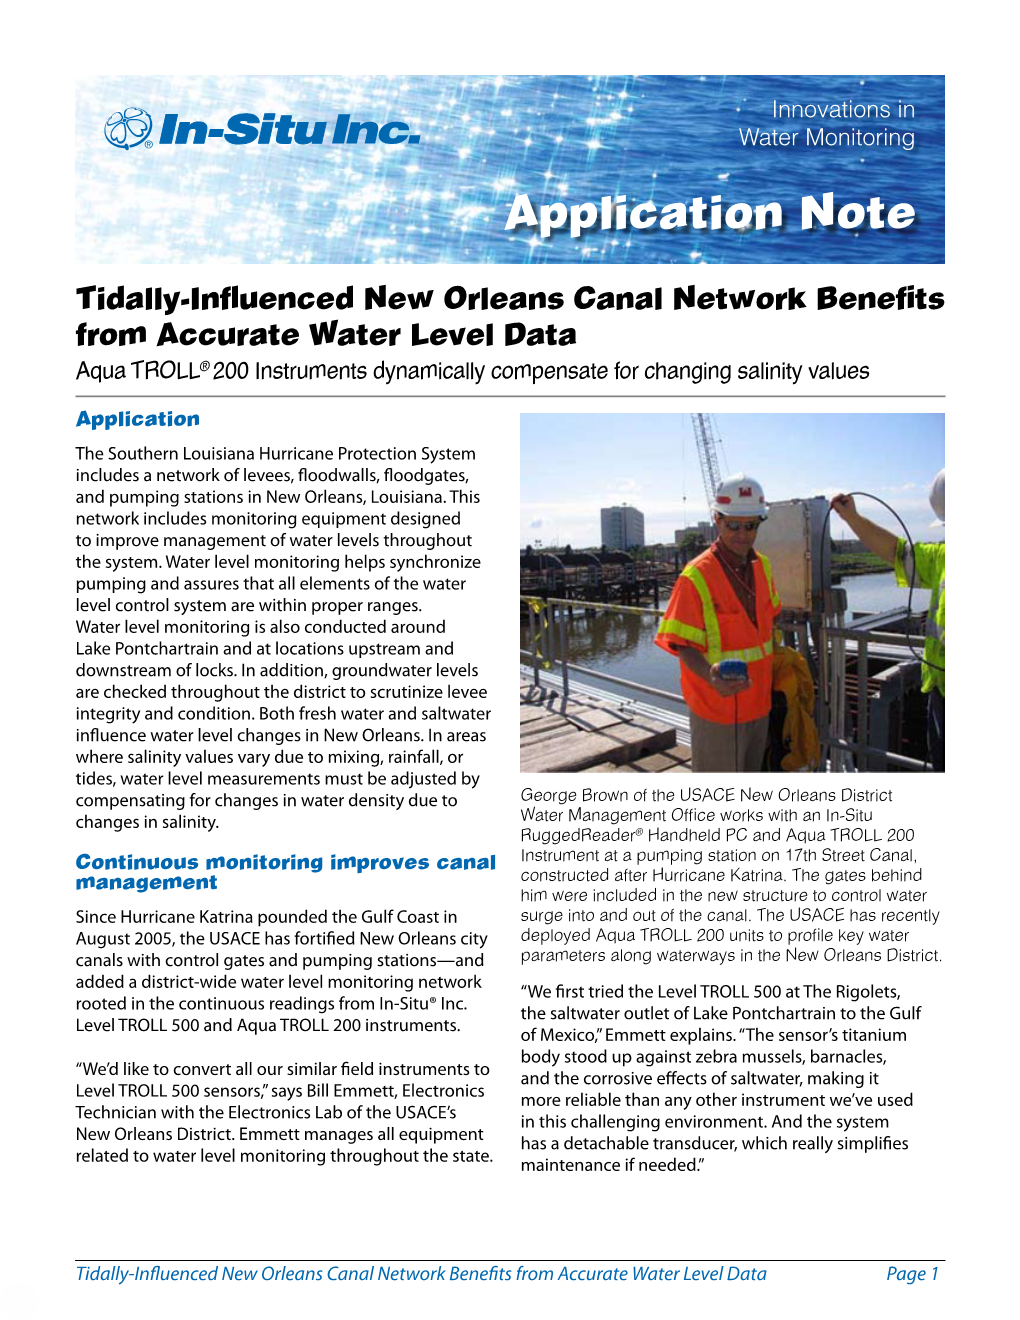 Tidally-Influenced New Orleans Canal Network Benefits from Accurate Water Level Data Aqua TROLL® 200 Instruments Dynamically Compensate for Changing Salinity Values